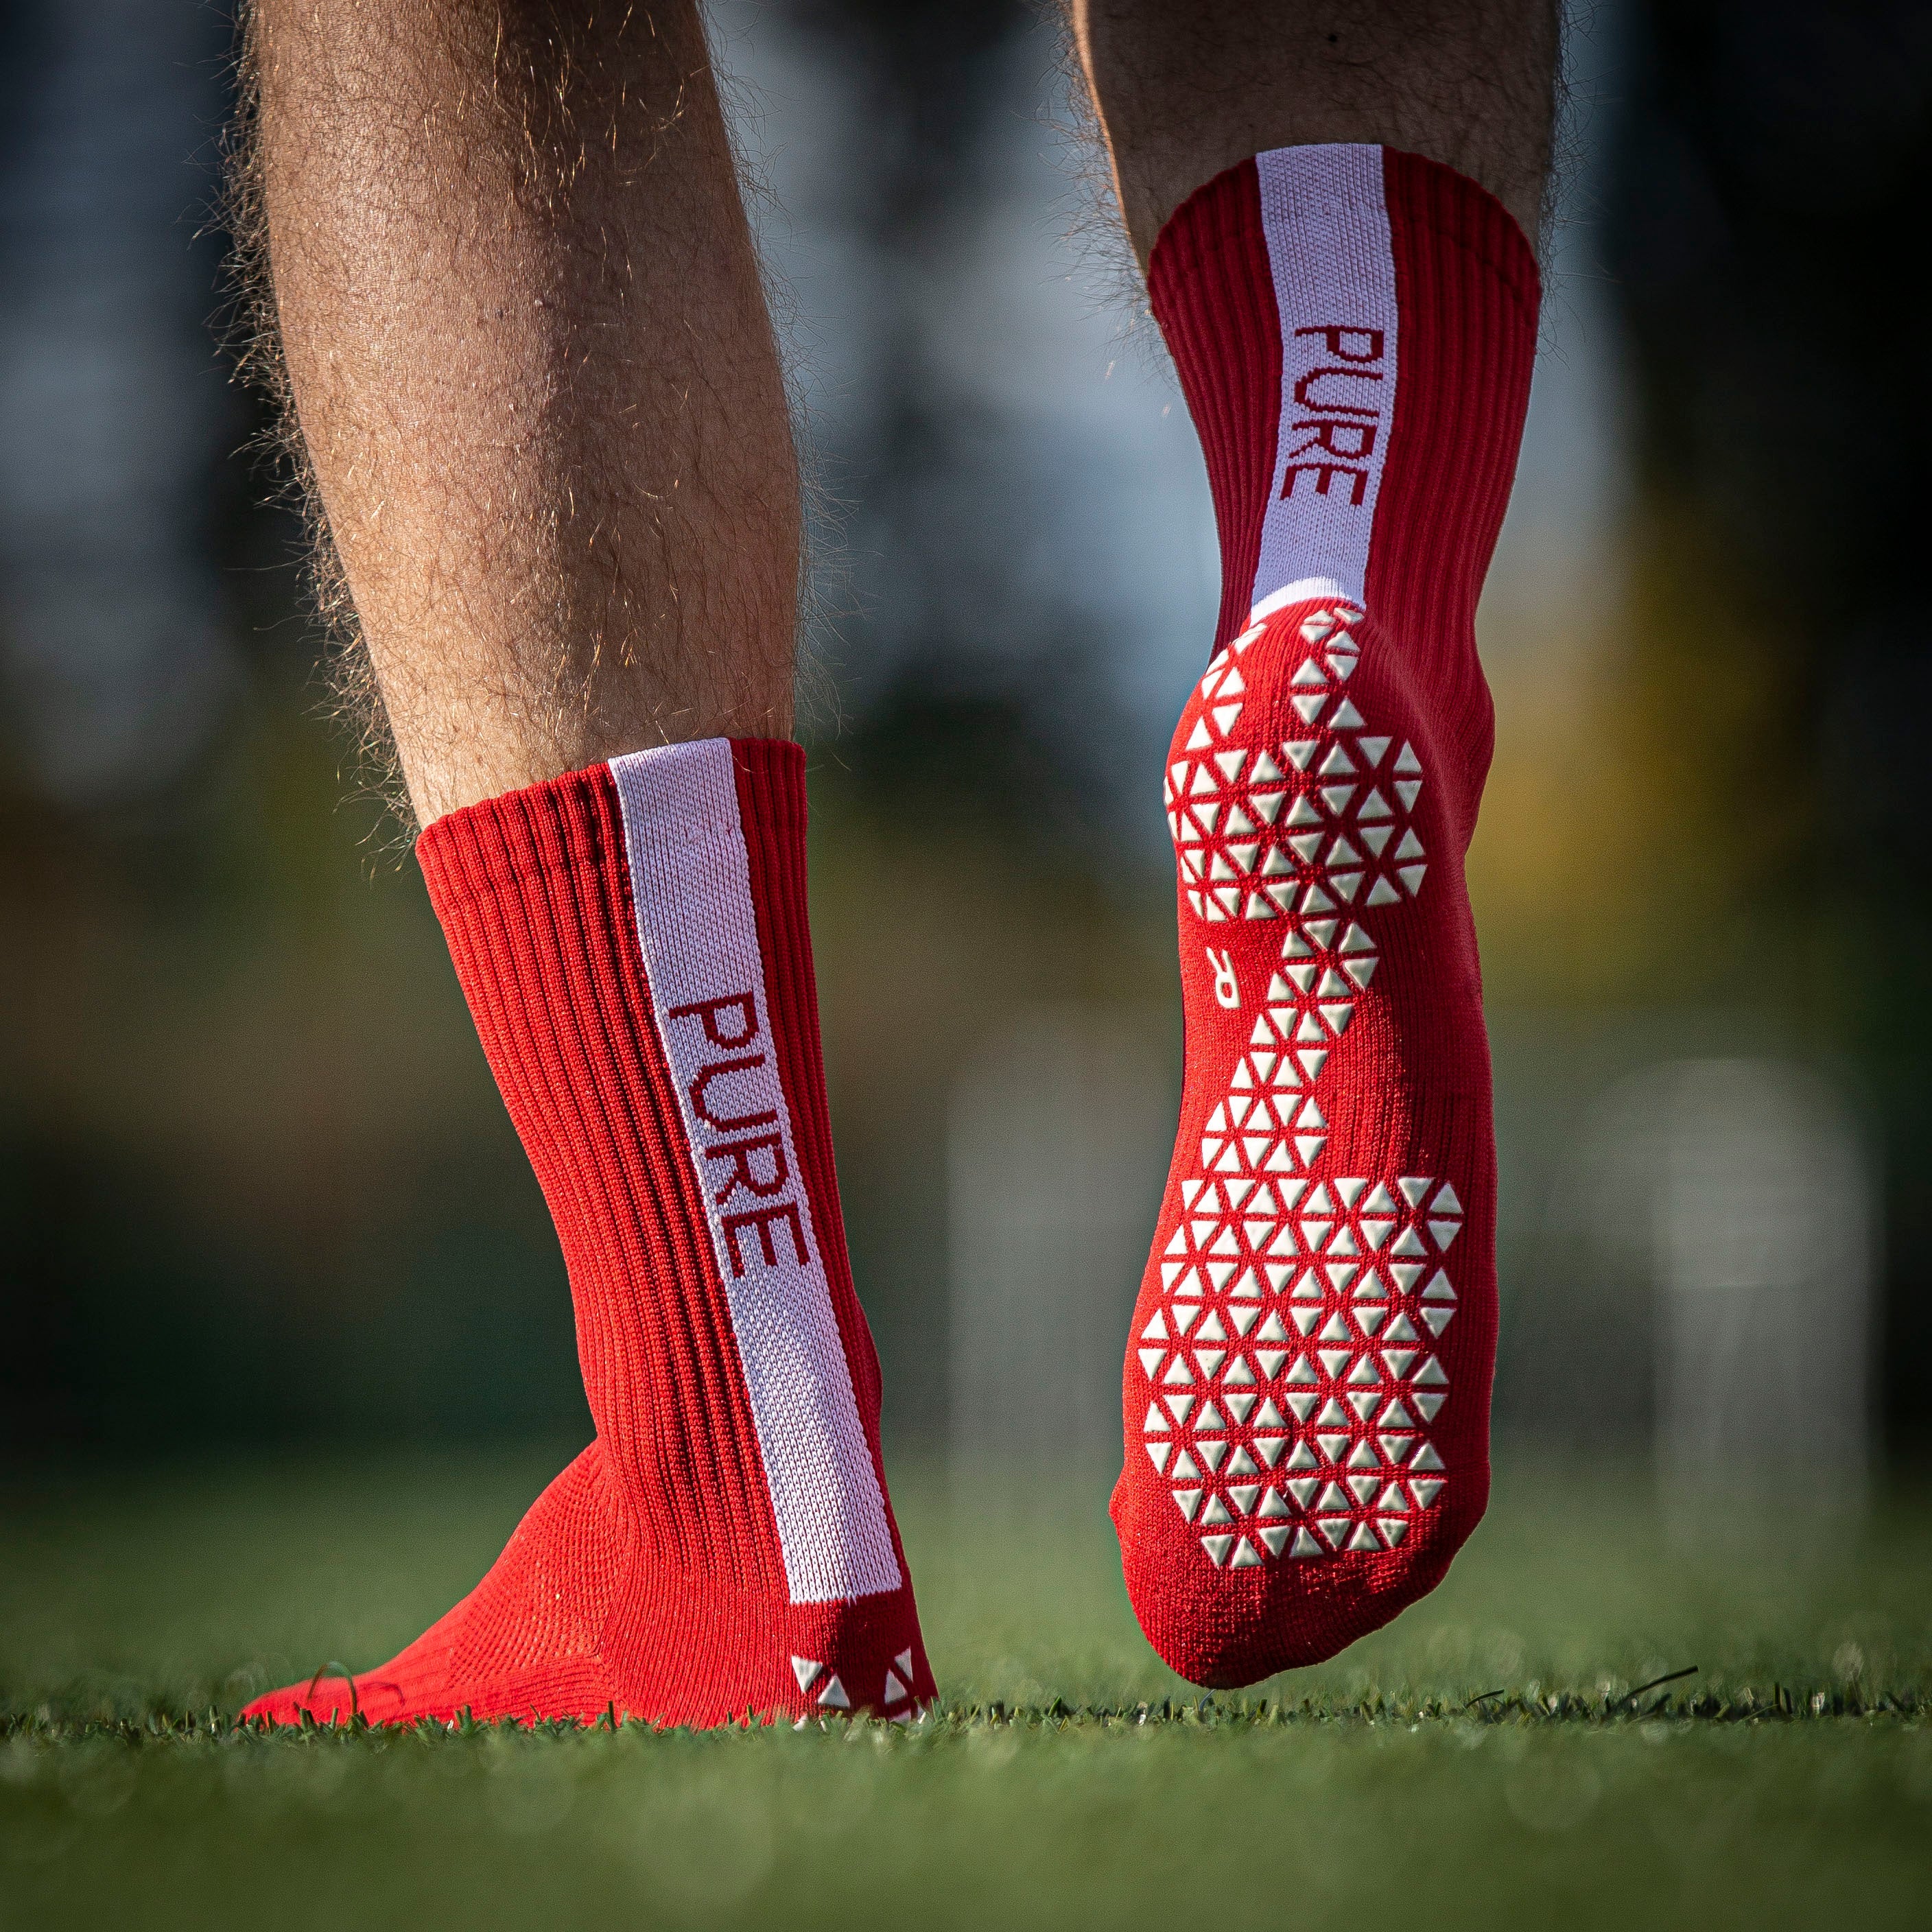 Pure Grip Socks - You know you want to⚡️Tag a friend or a